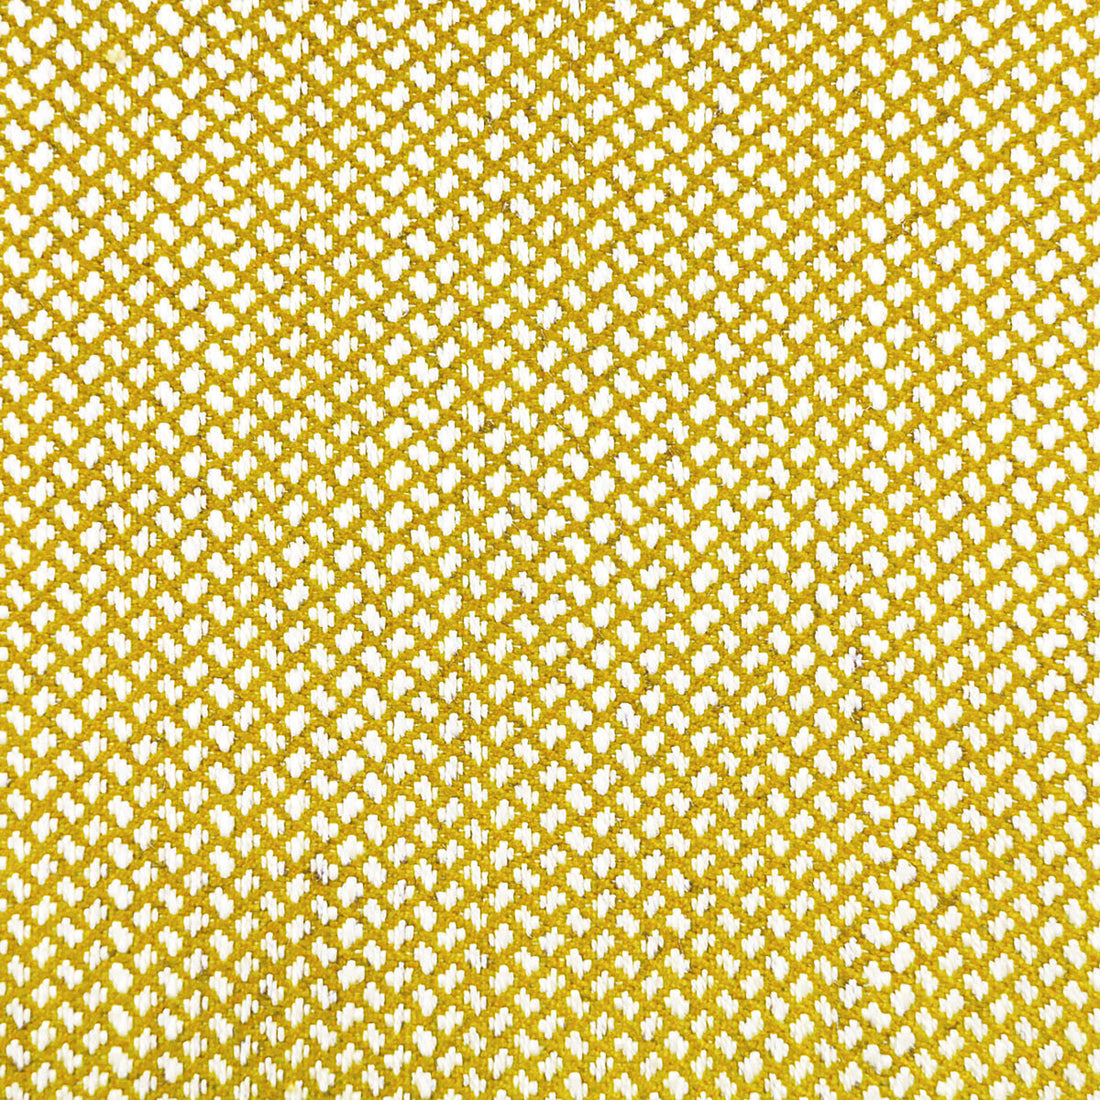 Sabuki fabric in amarillo color - pattern GDT5638.005.0 - by Gaston y Daniela in the Gaston Japon collection